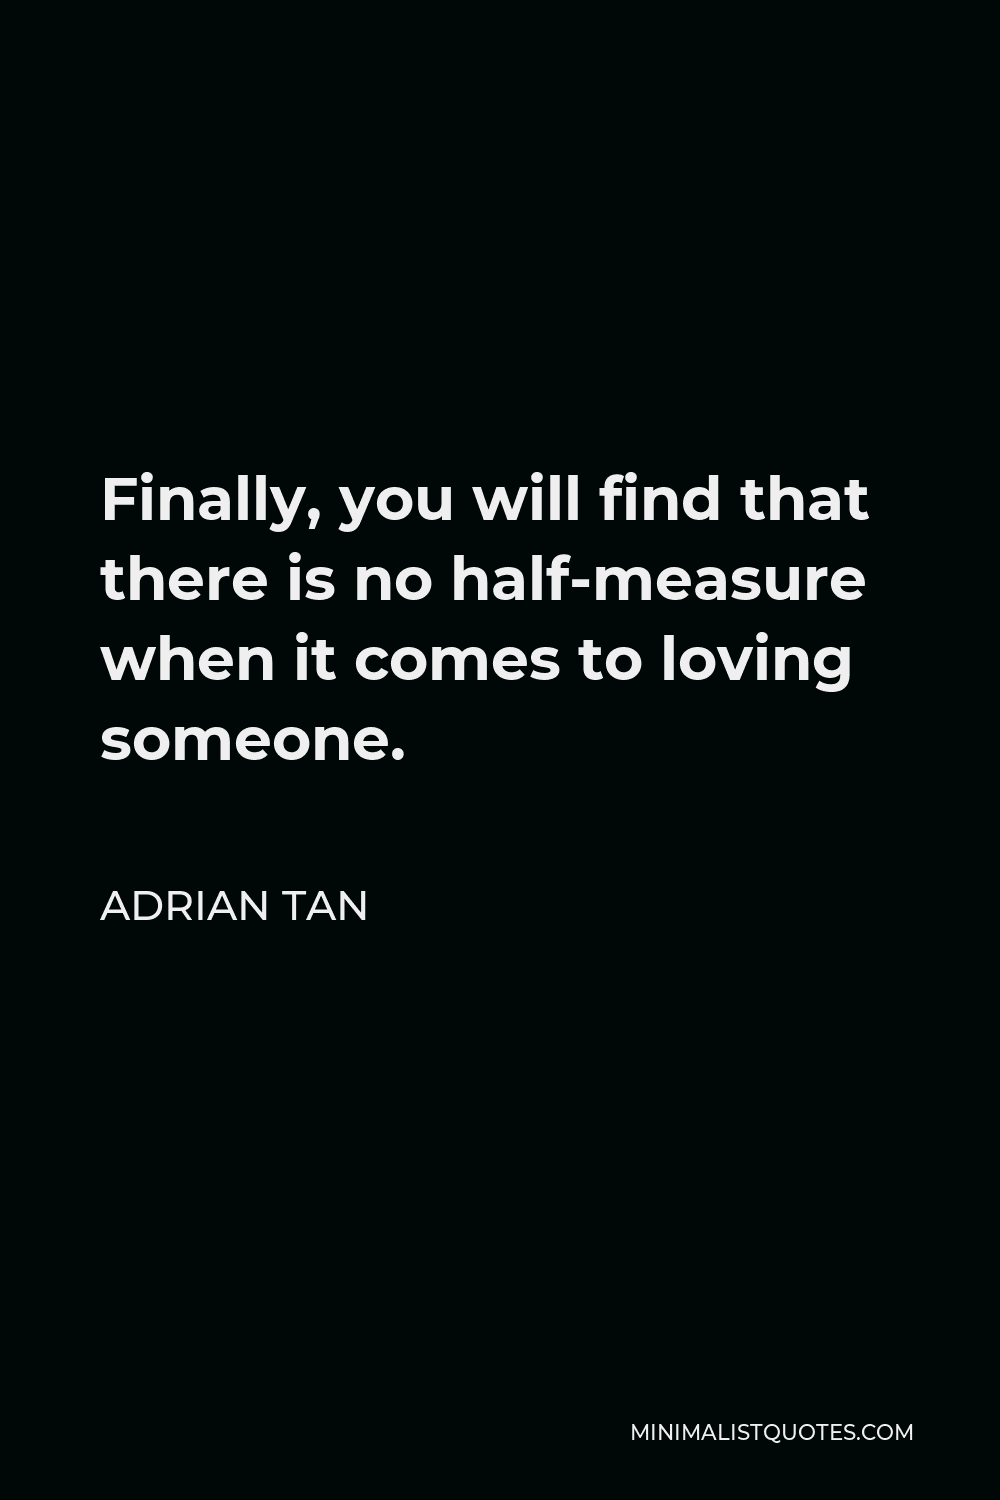 Adrian Tan Quote - Finally, you will find that there is no half-measure when it comes to loving someone.